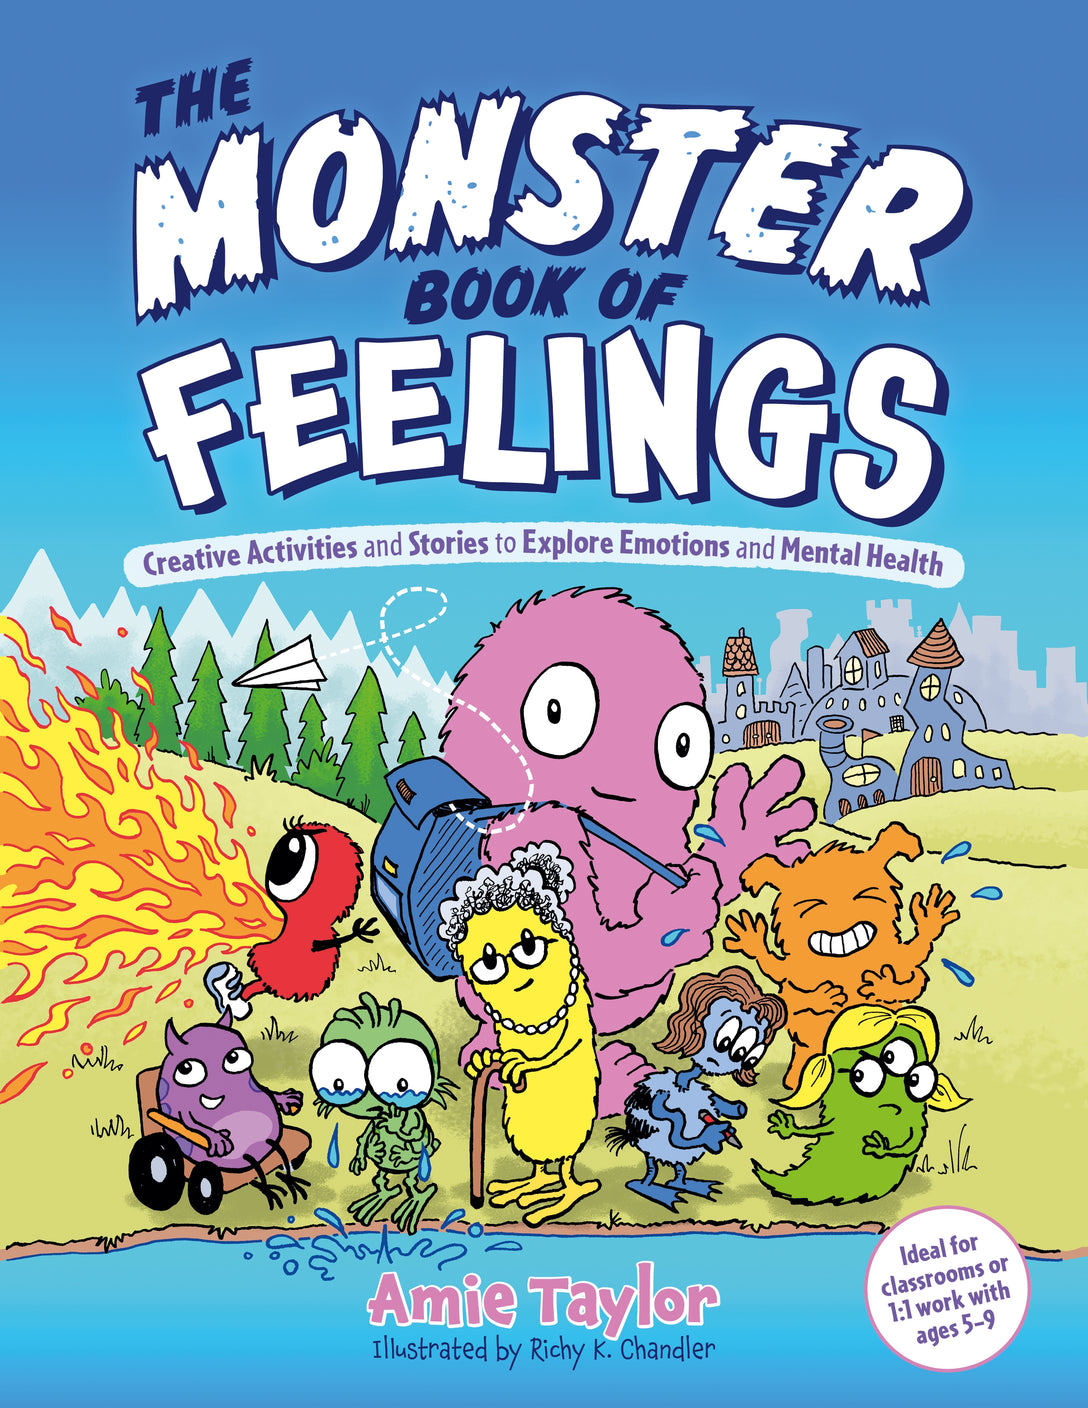 The Monster Book of Feelings by Richy K. Chandler, Amie Taylor